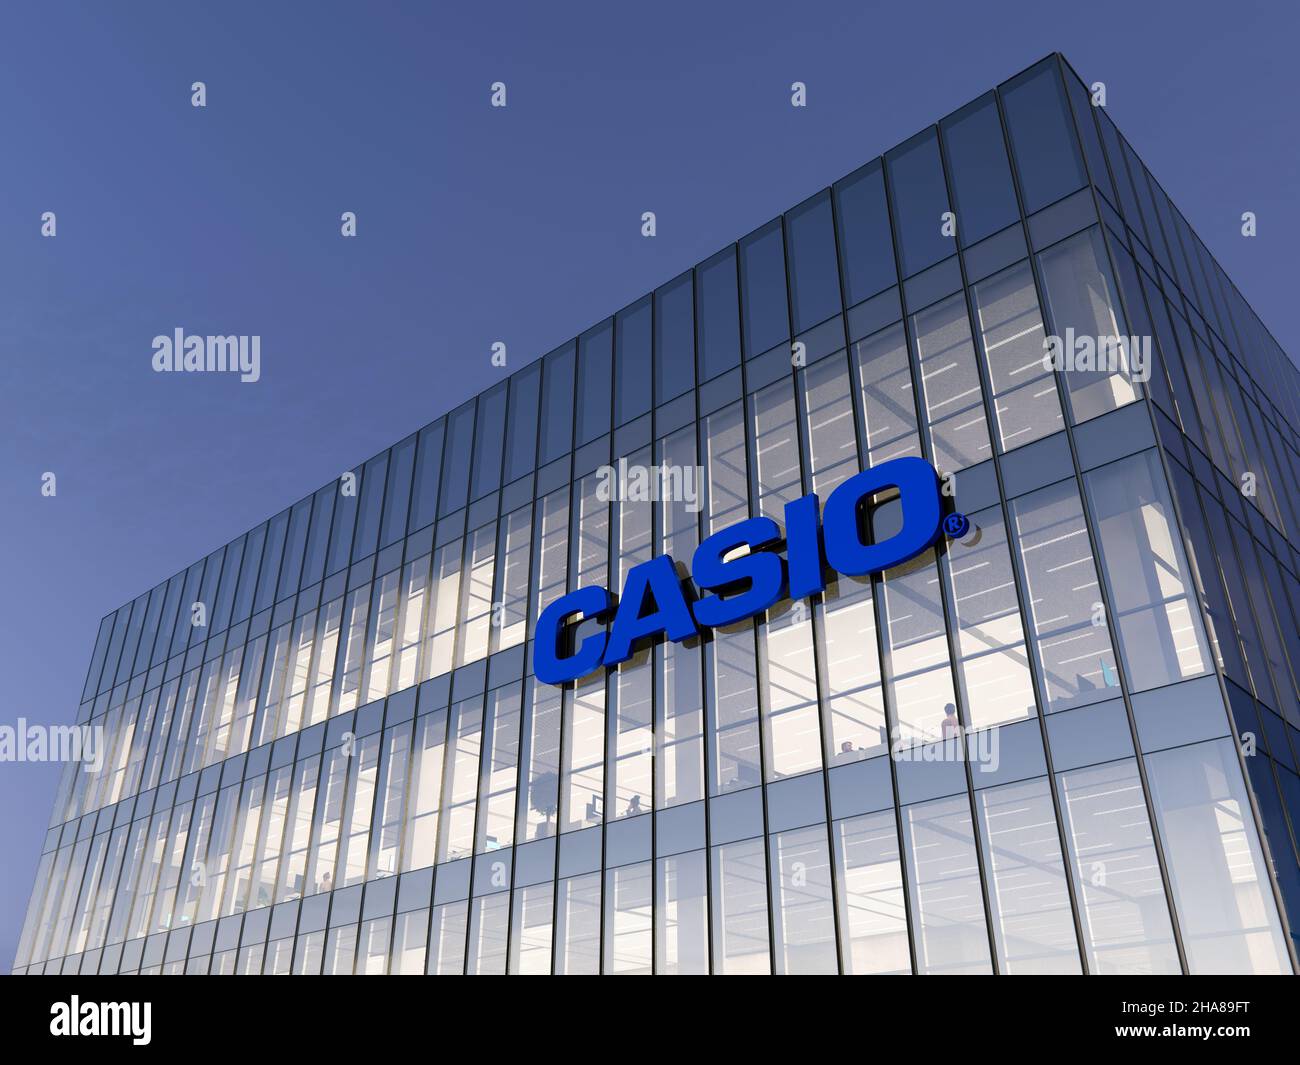 Casio Logo High Resolution Stock Photography and Images - Alamy